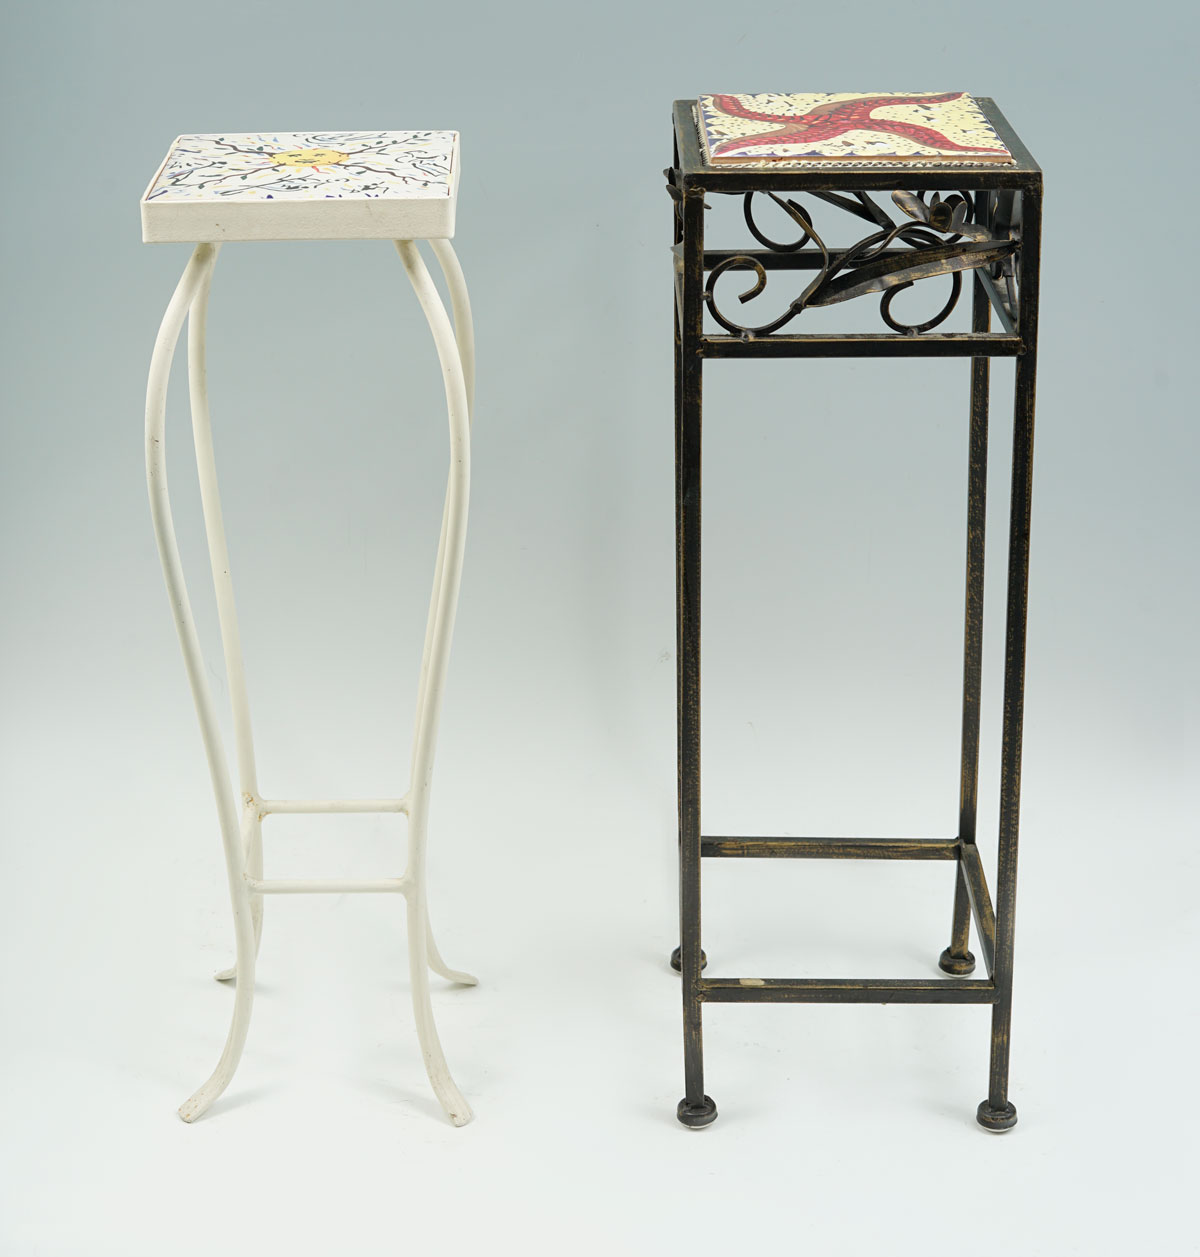 TWO SALVADOR DALI TILE-TOP STANDS: